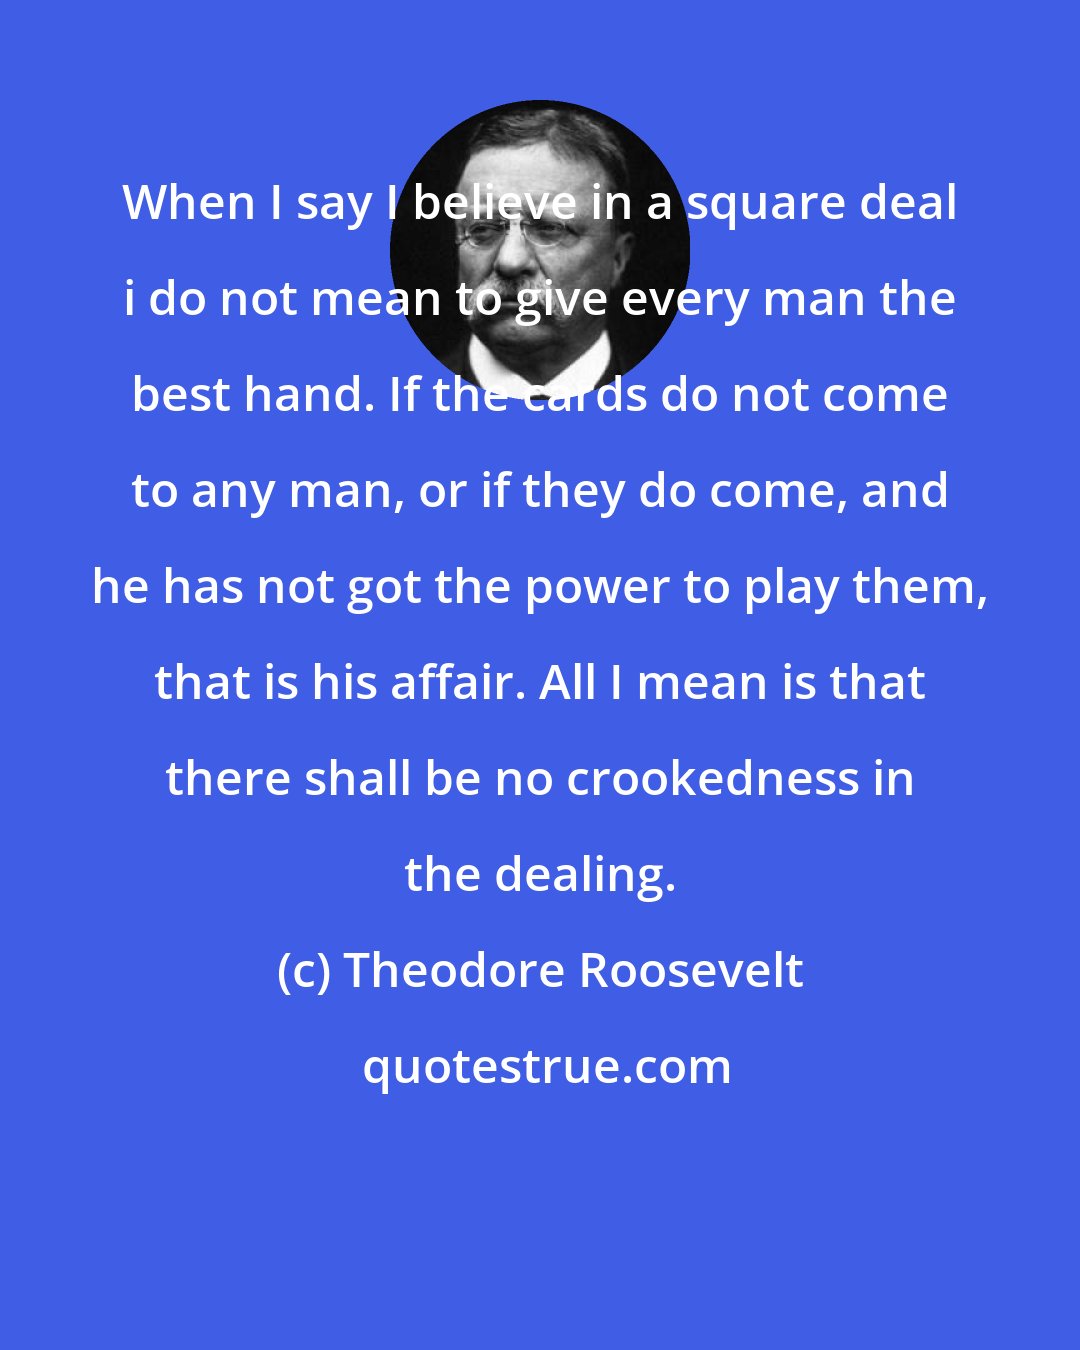 Theodore Roosevelt: When I say I believe in a square deal i do not mean to give every man the best hand. If the cards do not come to any man, or if they do come, and he has not got the power to play them, that is his affair. All I mean is that there shall be no crookedness in the dealing.